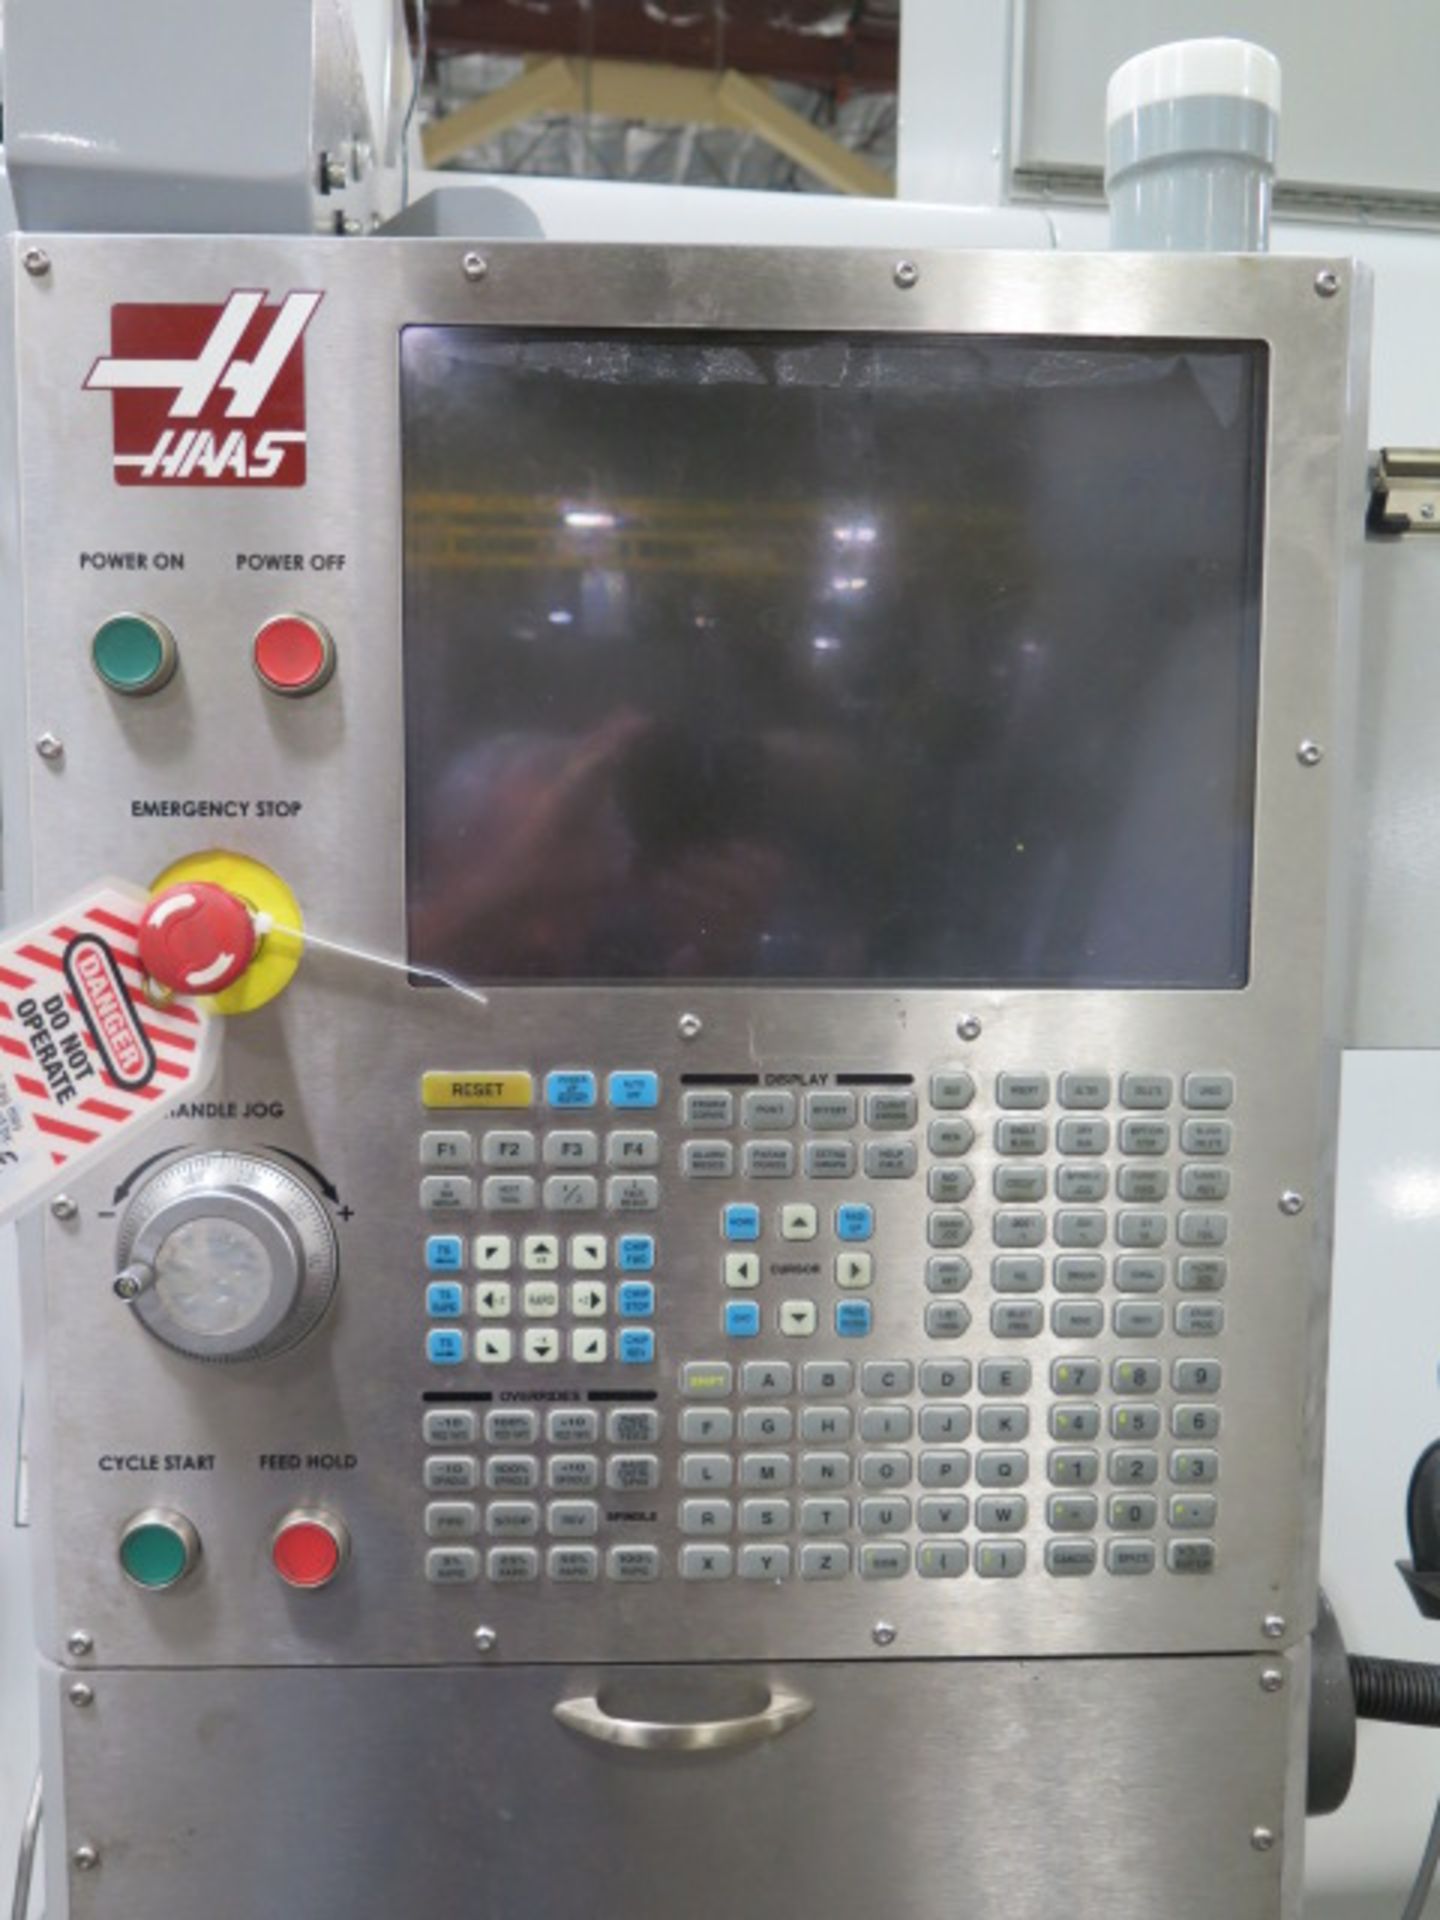 2007 Haas SL-40 CNC Turning Center s/n 3078757 w/ Haas Controls, Hand Wheel, Tool Presetter, 12-St - Image 5 of 18